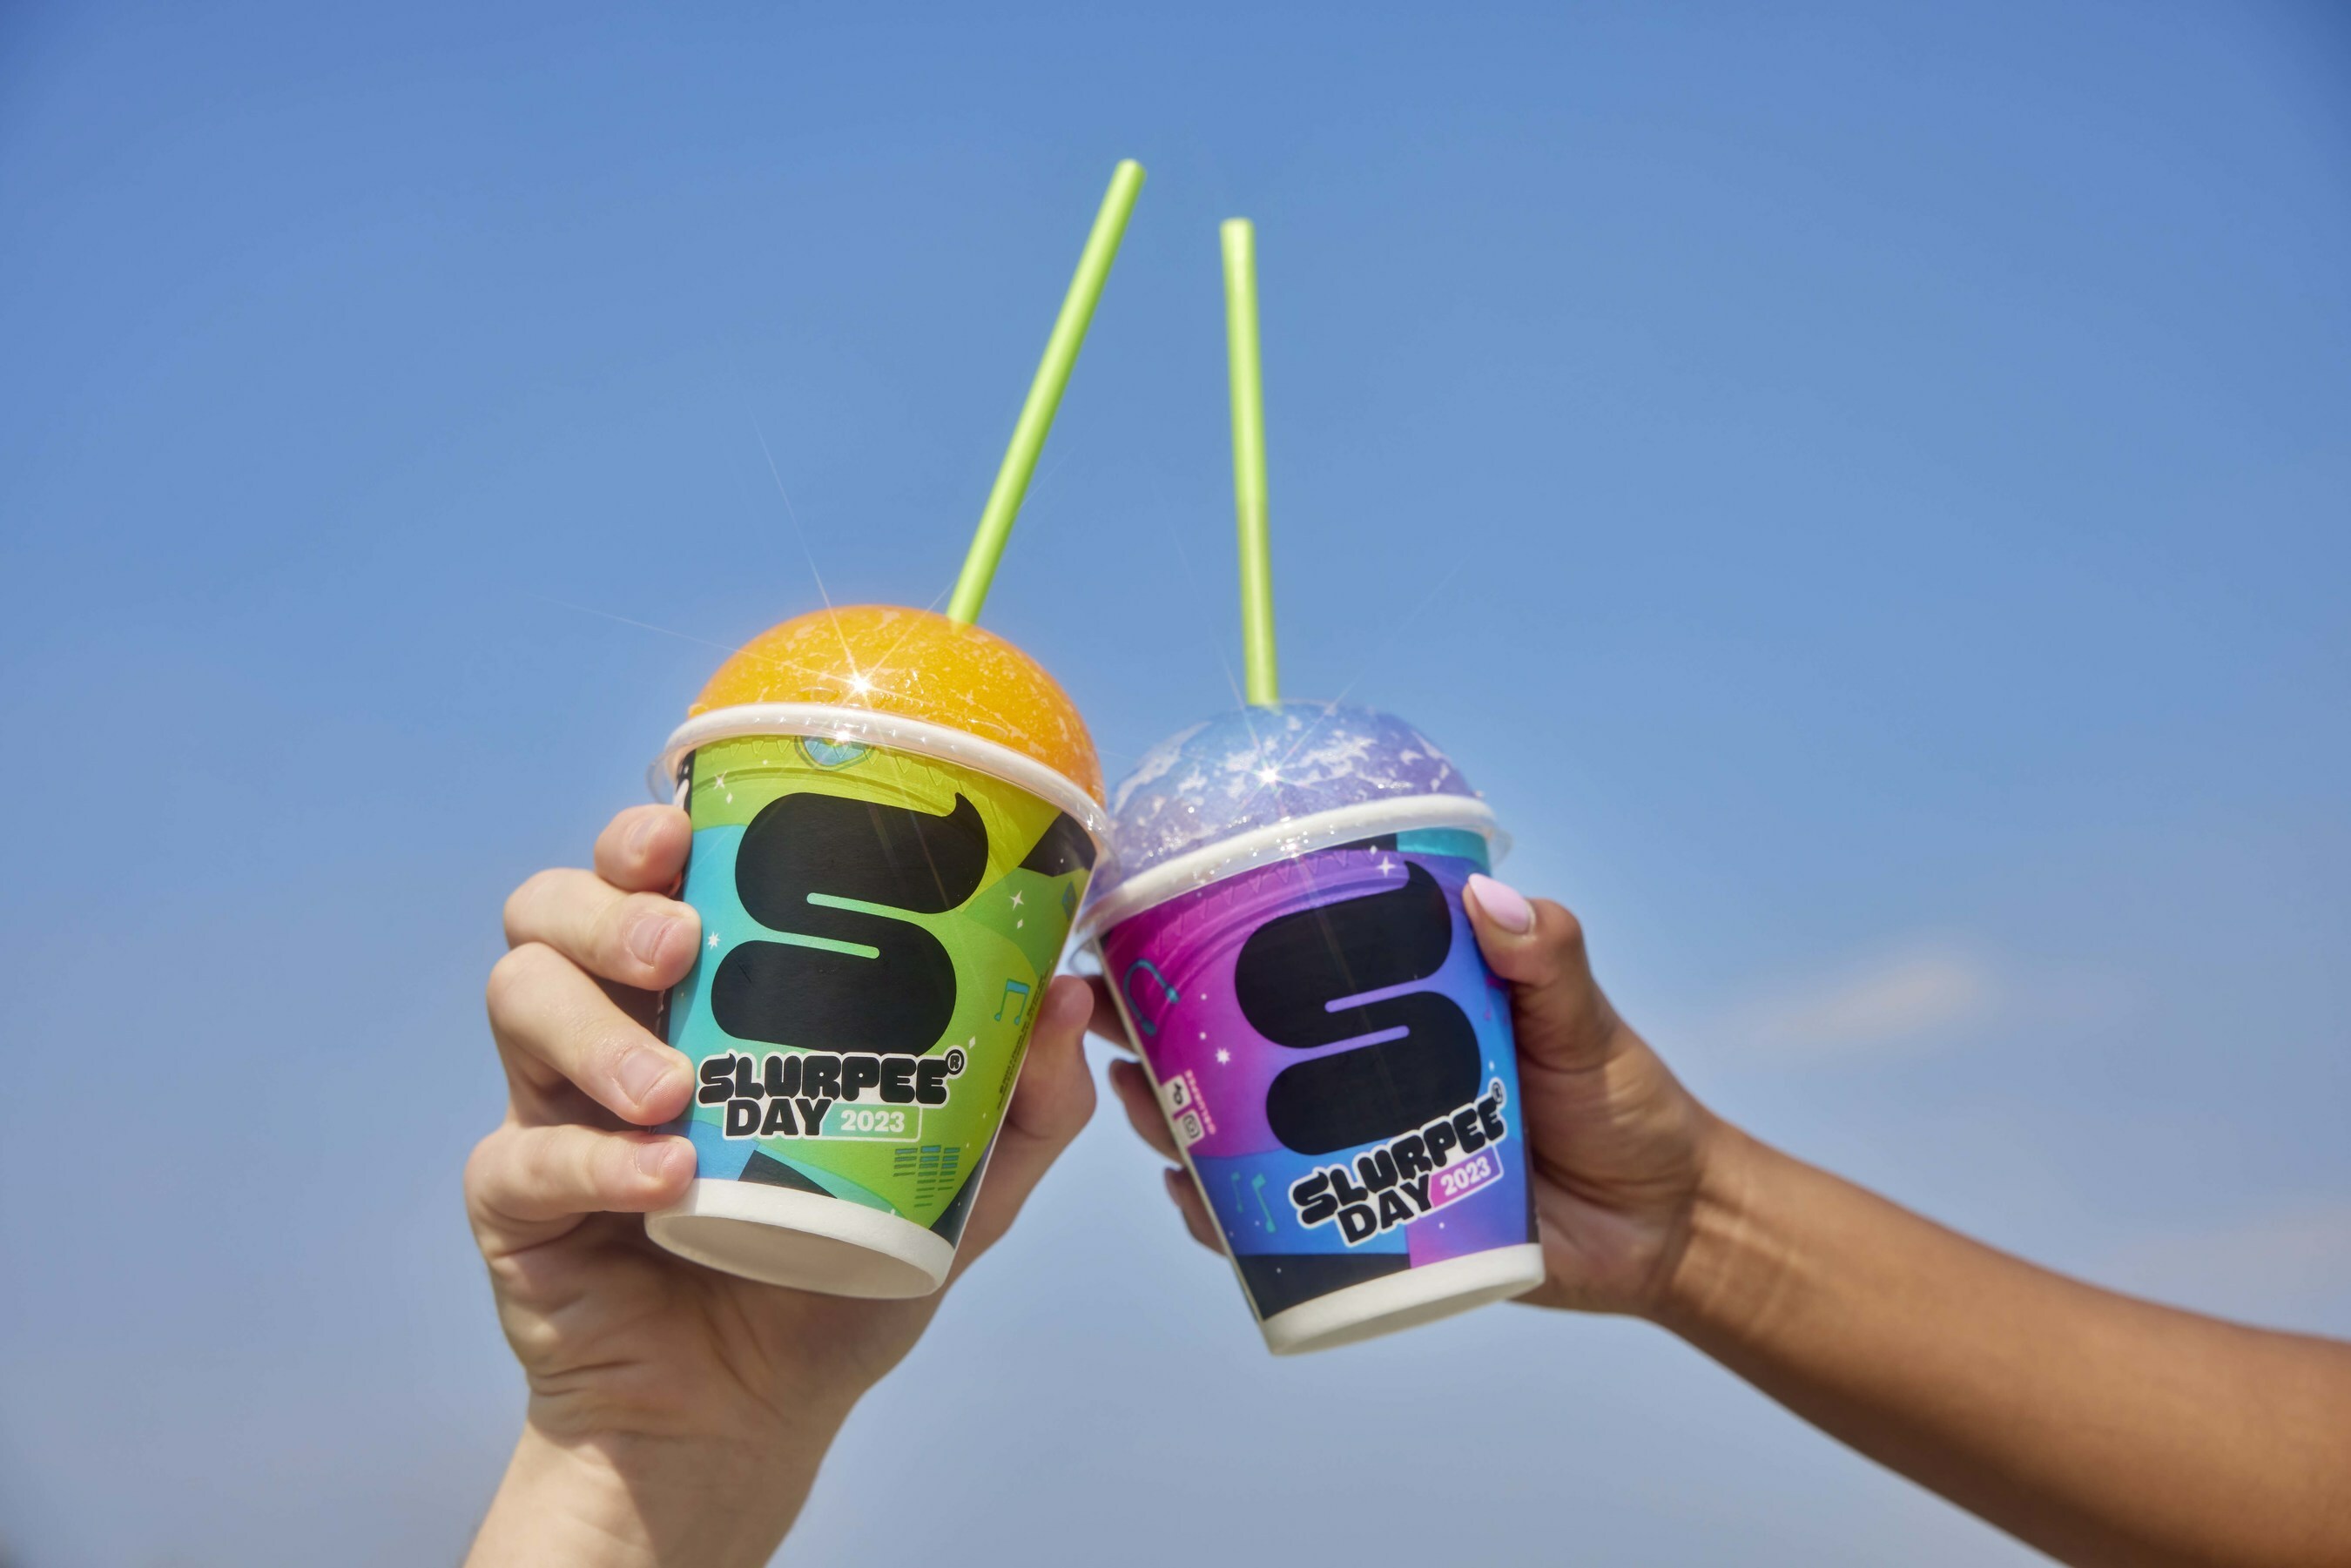 Tuesday is National 7-Eleven Day: How to get your free Slurpee